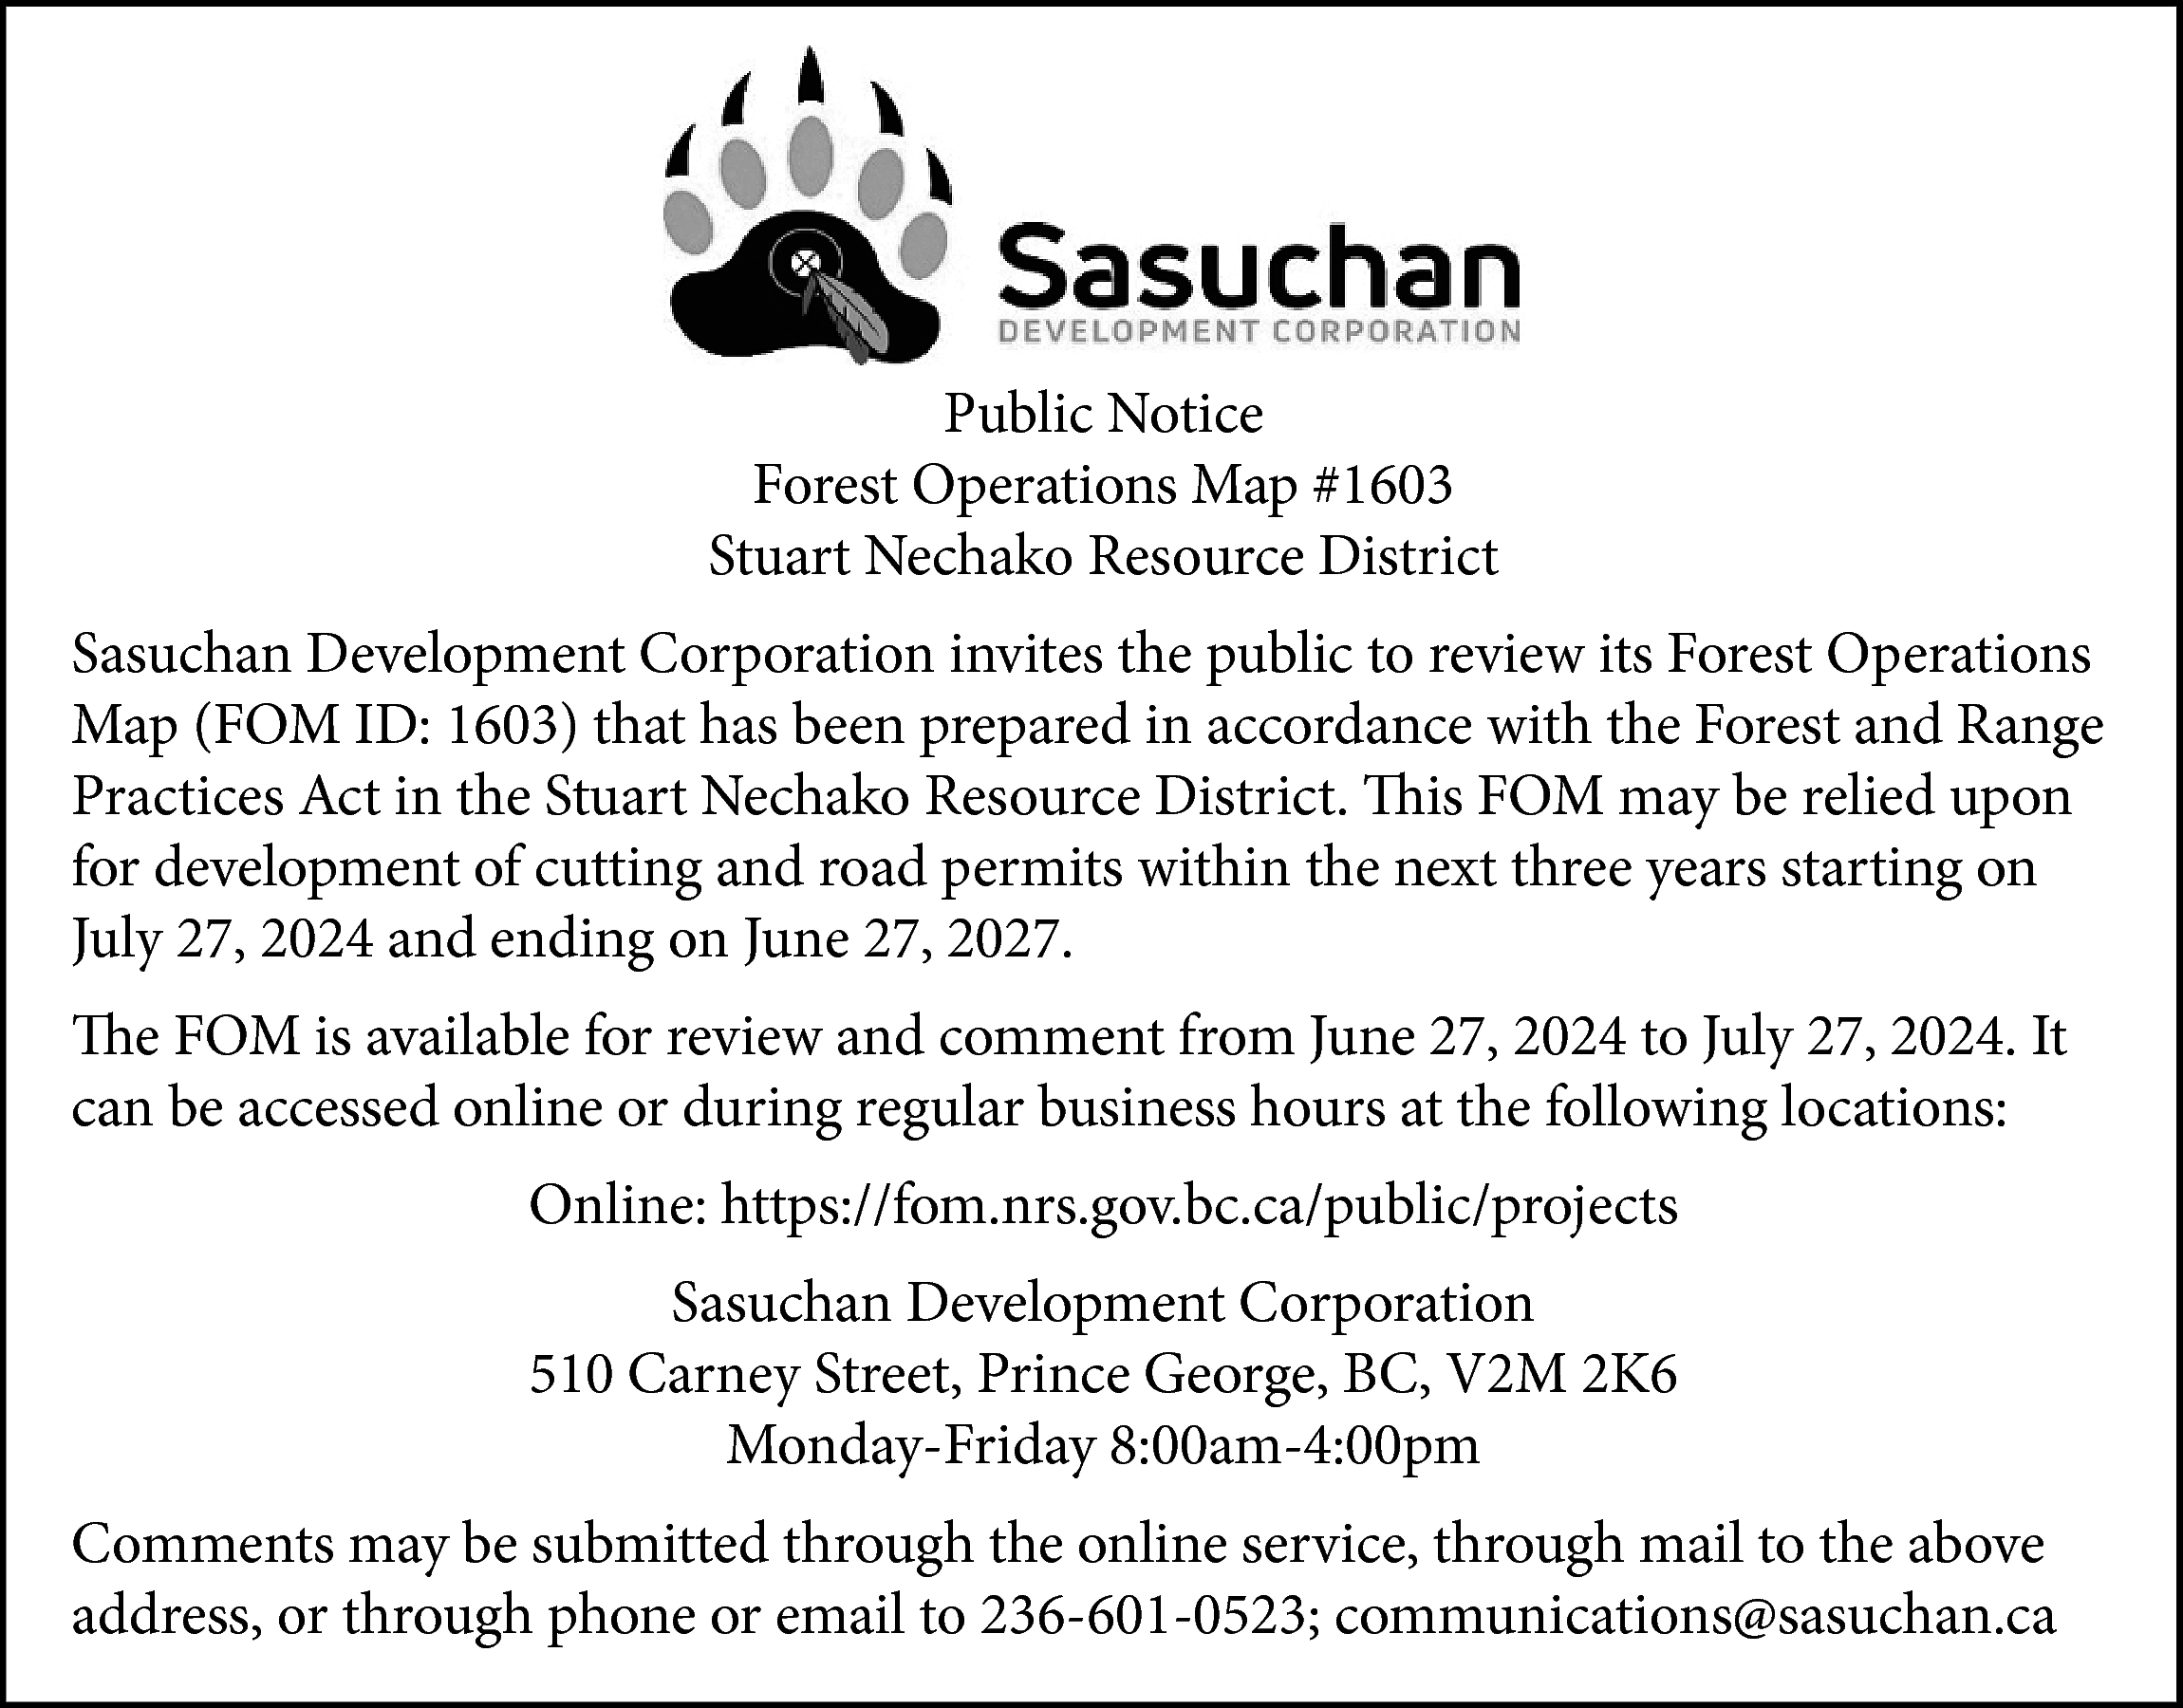 Public Notice <br>Forest Operations Map  Public Notice  Forest Operations Map #1603  Stuart Nechako Resource District  Sasuchan Development Corporation invites the public to review its Forest Operations  Map (FOM ID: 1603) that has been prepared in accordance with the Forest and Range  Practices Act in the Stuart Nechako Resource District. This FOM may be relied upon  for development of cutting and road permits within the next three years starting on  July 27, 2024 and ending on June 27, 2027.  The FOM is available for review and comment from June 27, 2024 to July 27, 2024. It  can be accessed online or during regular business hours at the following locations:  Online: https://fom.nrs.gov.bc.ca/public/projects  Sasuchan Development Corporation  510 Carney Street, Prince George, BC, V2M 2K6  Monday-Friday 8:00am-4:00pm  Comments may be submitted through the online service, through mail to the above  address, or through phone or email to 236-601-0523; communications@sasuchan.ca    